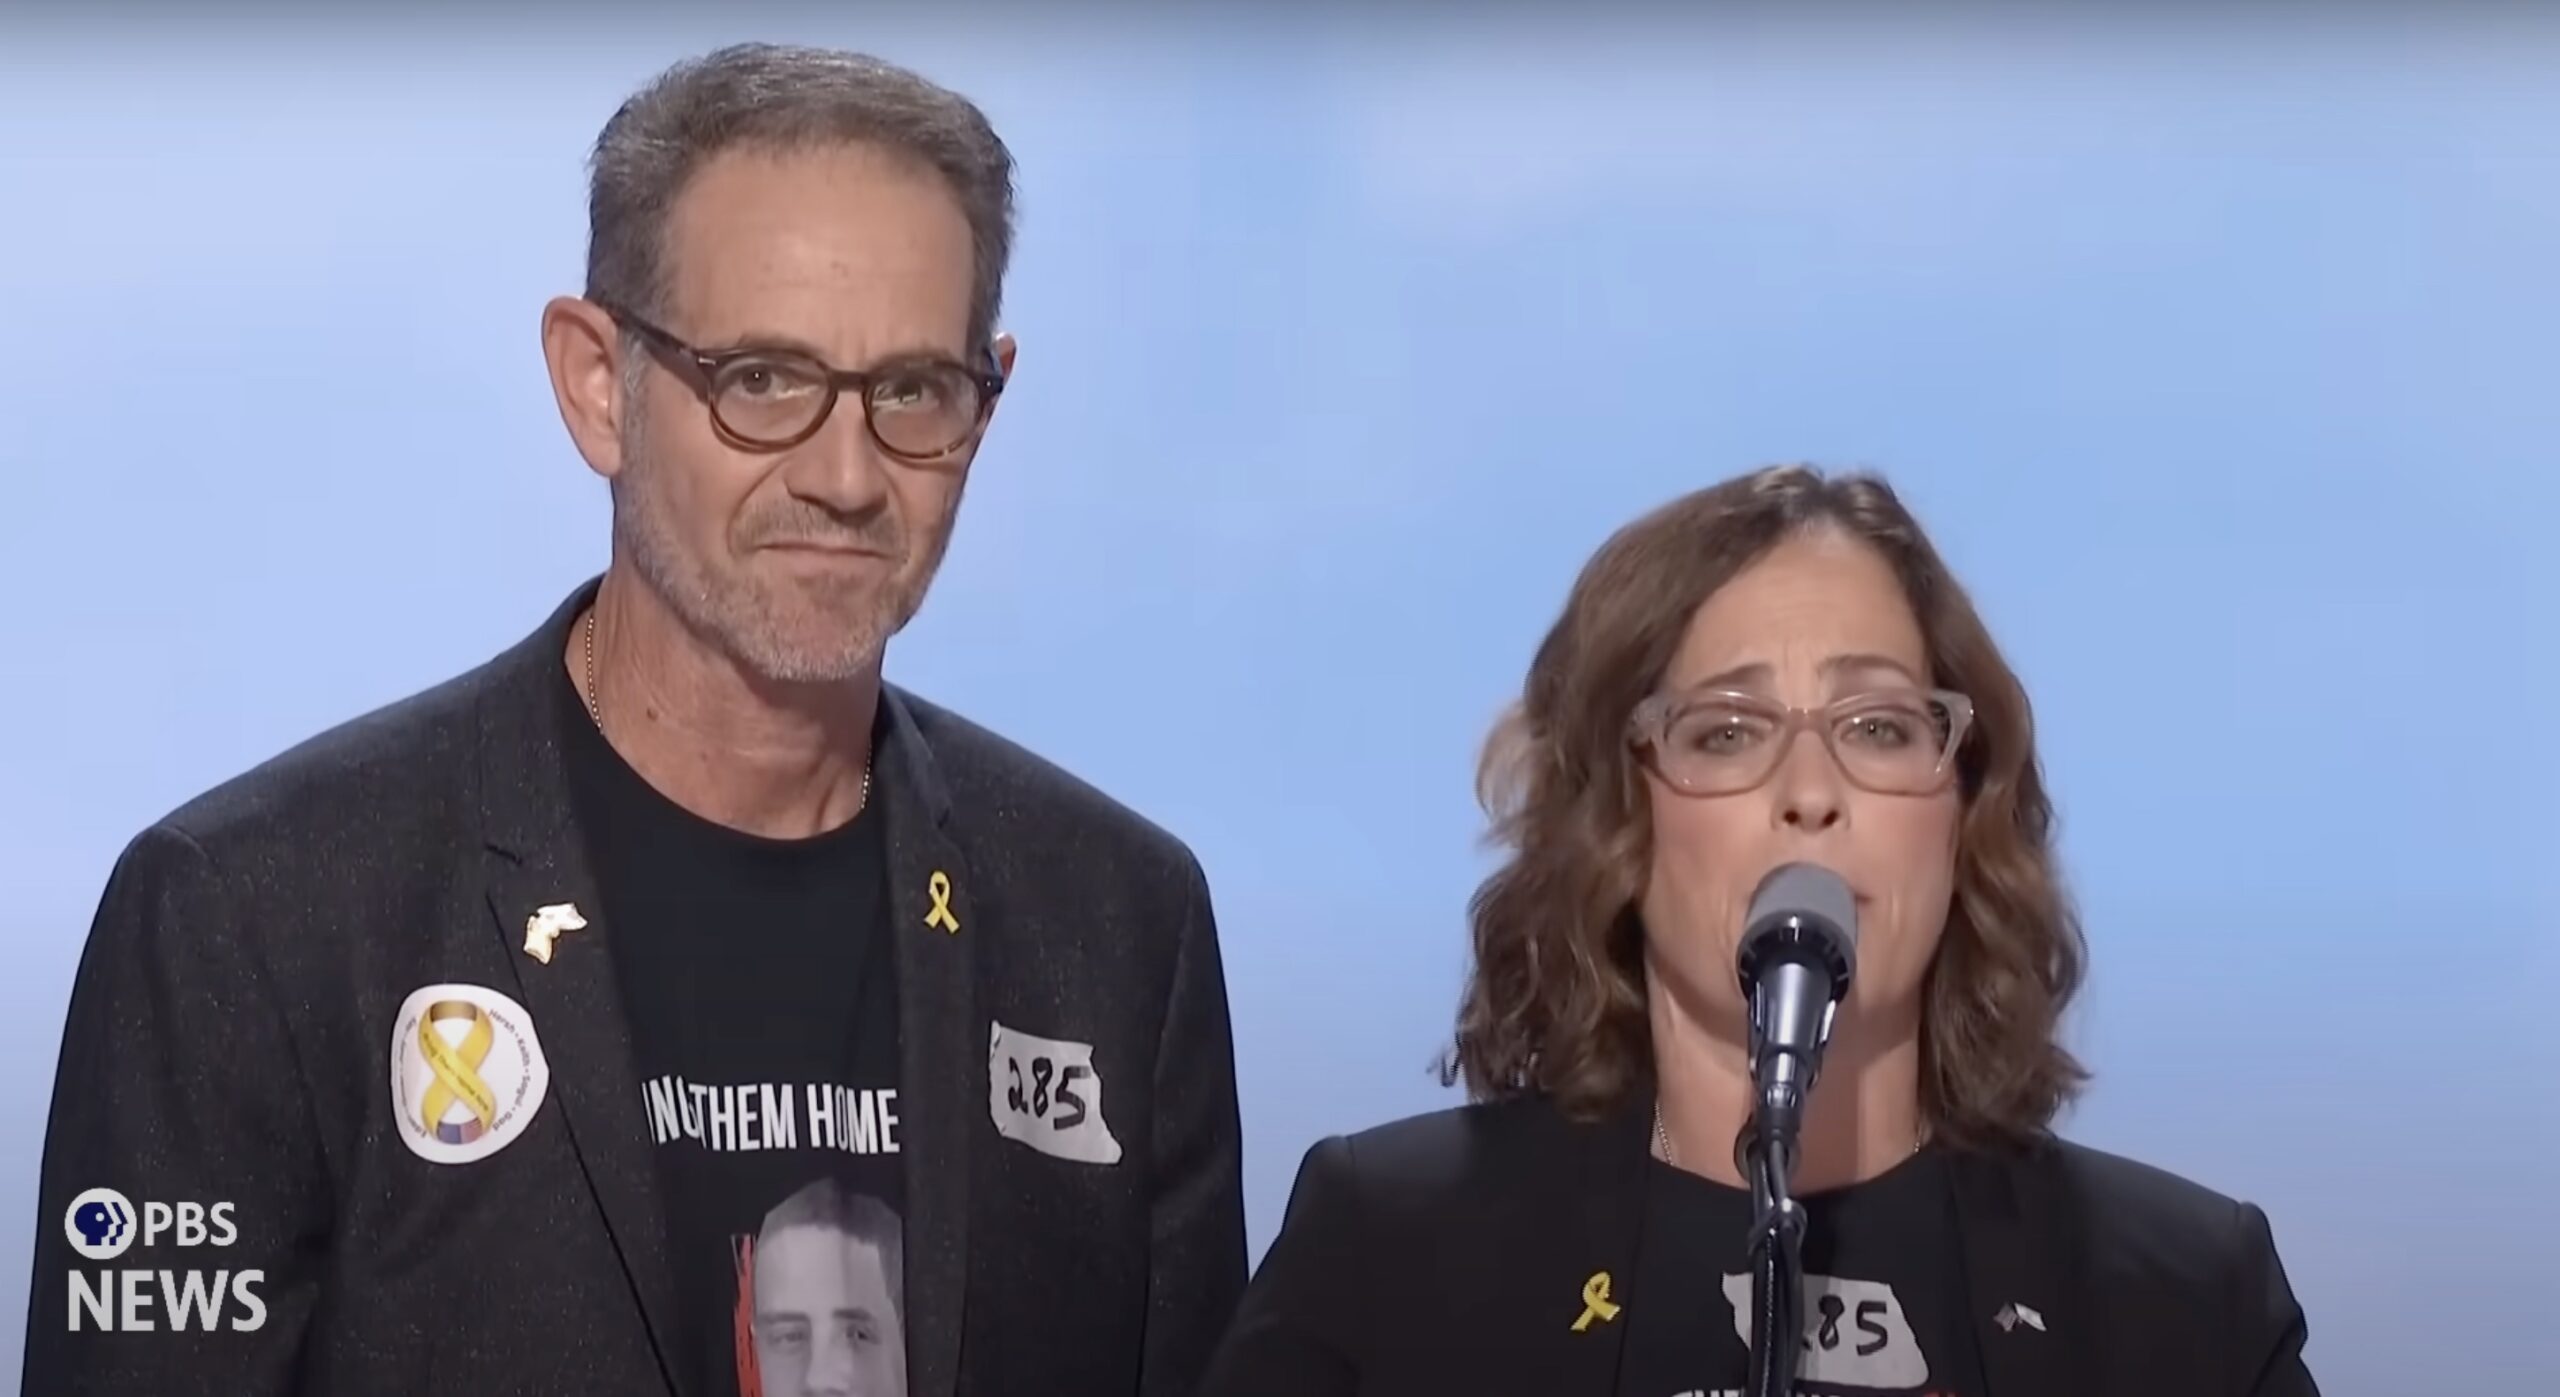 Family of Israeli-American hostage blames Biden for failure to secure release